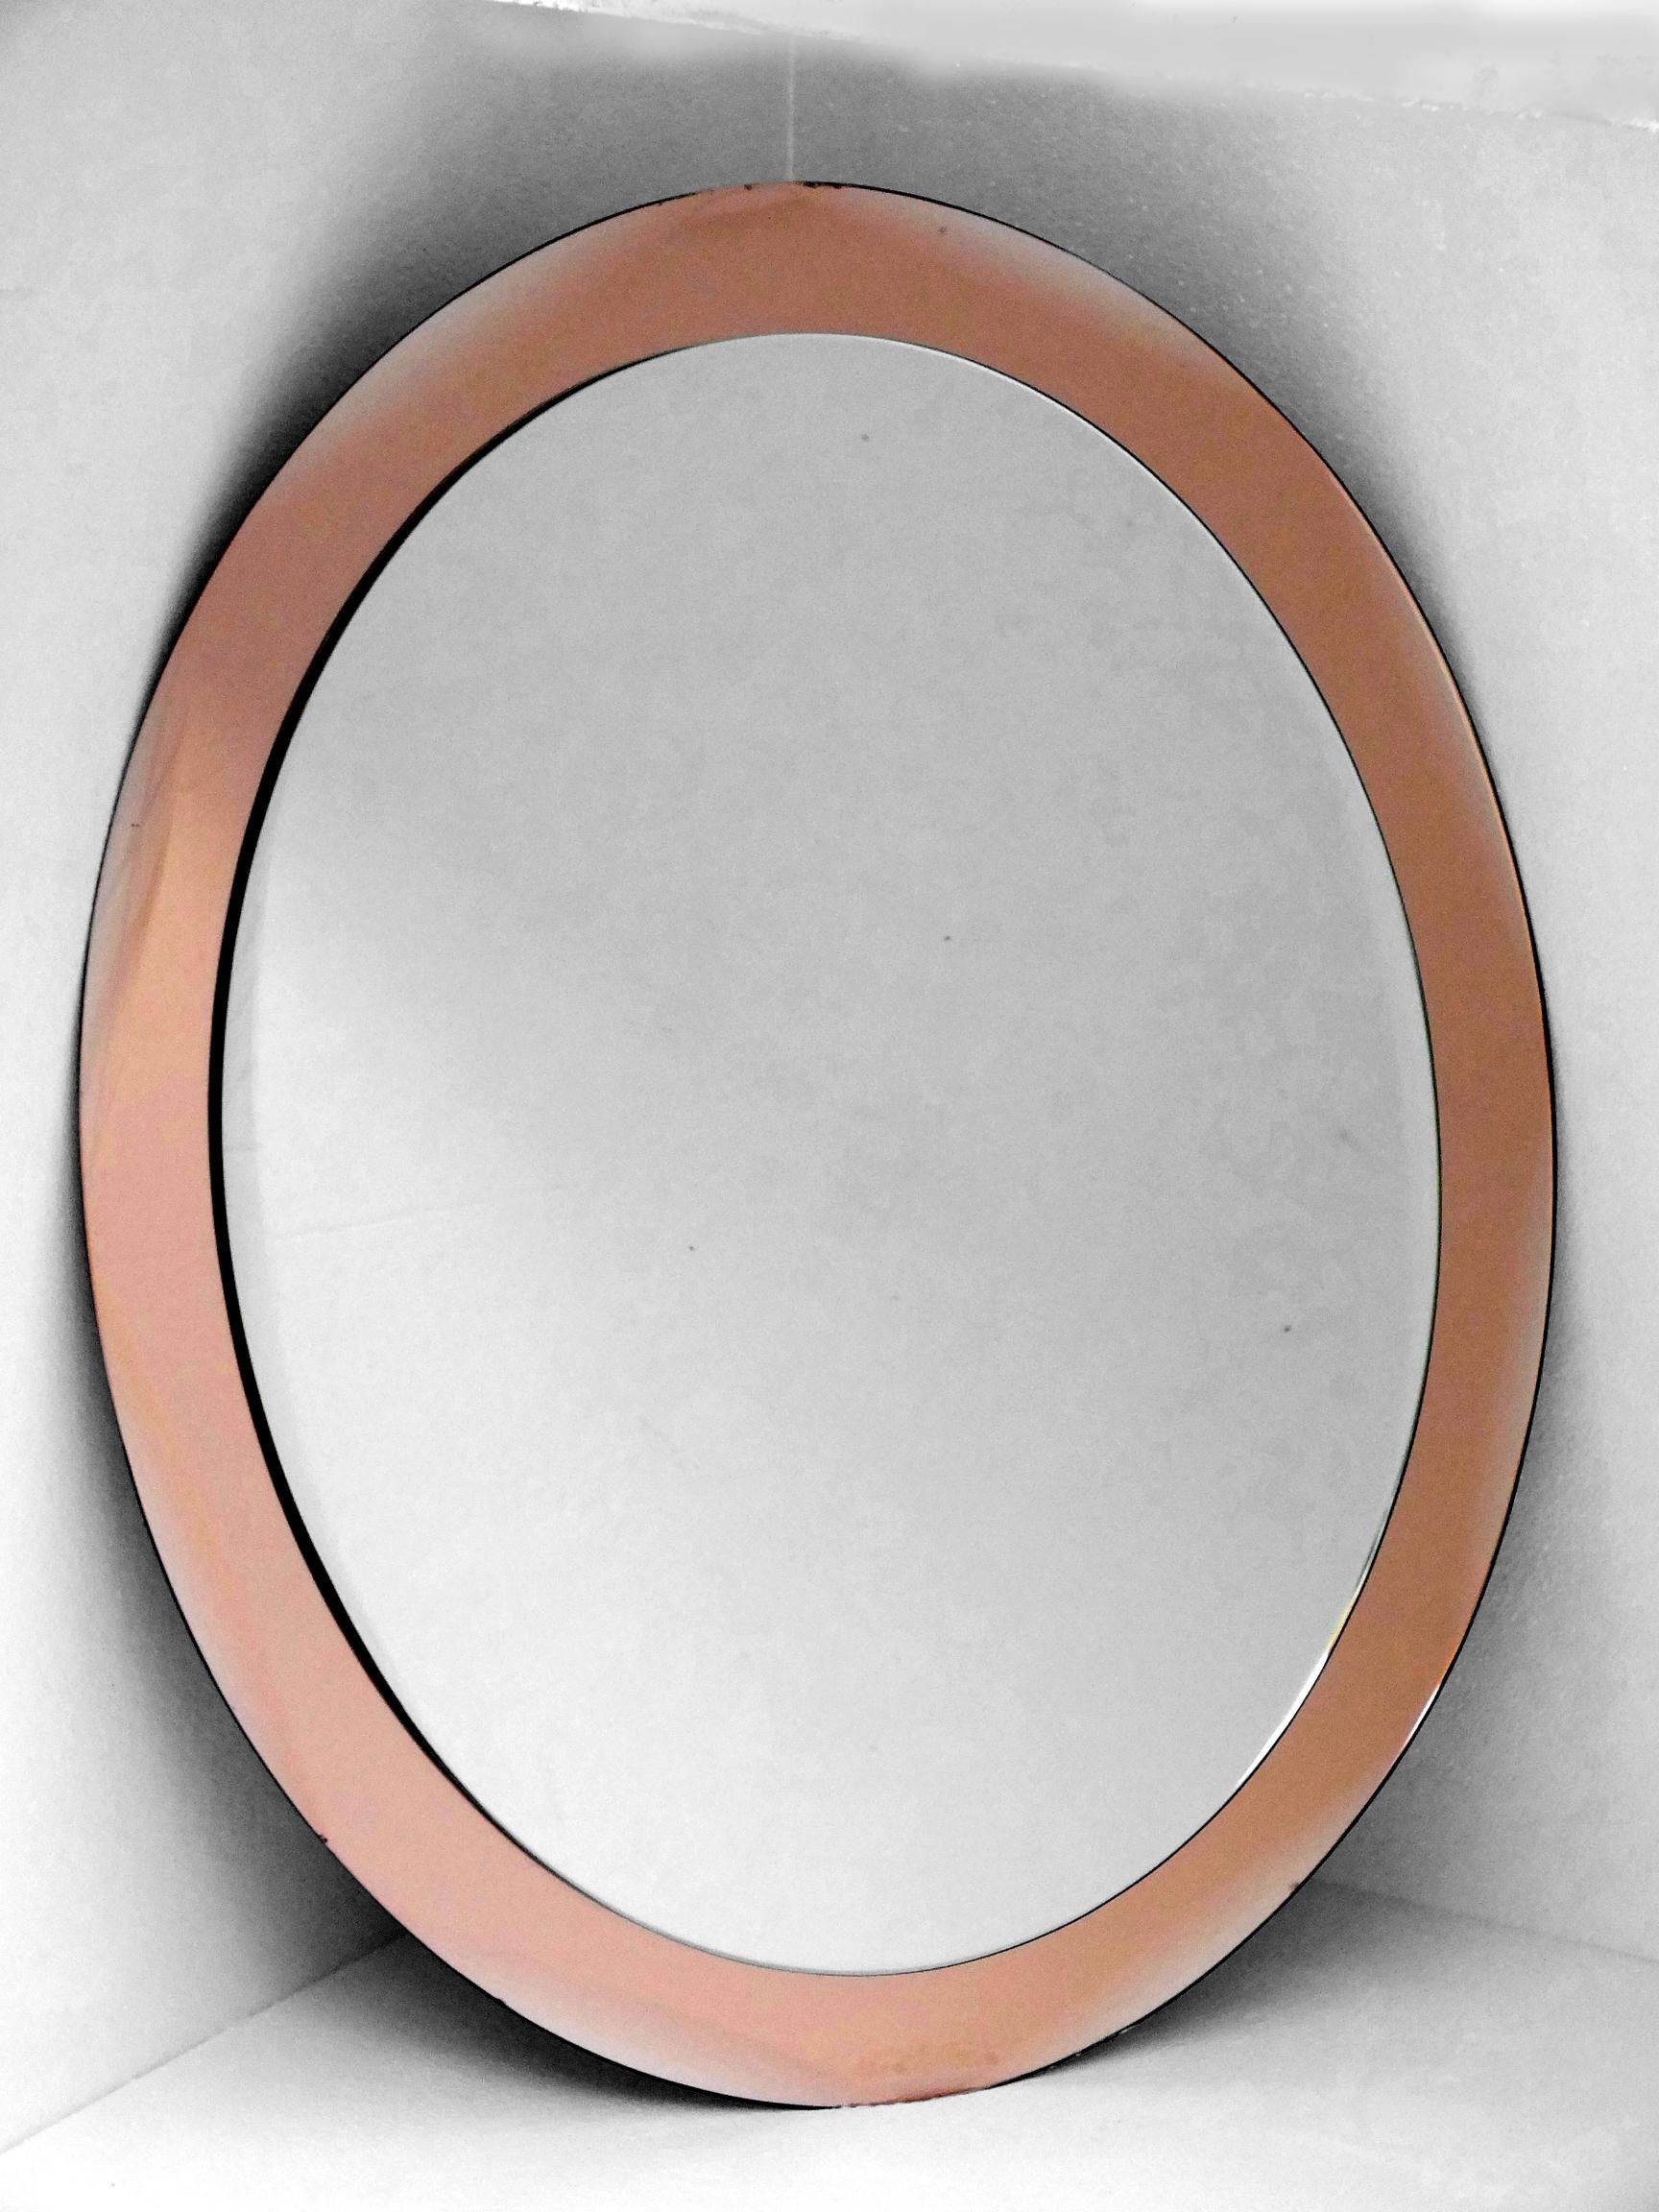 Antonio Lupi Luxor cristal art Italy mirror in rose / copper colour design years 1950

 Measure 31 inches x 25 inches, delicate and fine work in good vintage condition A